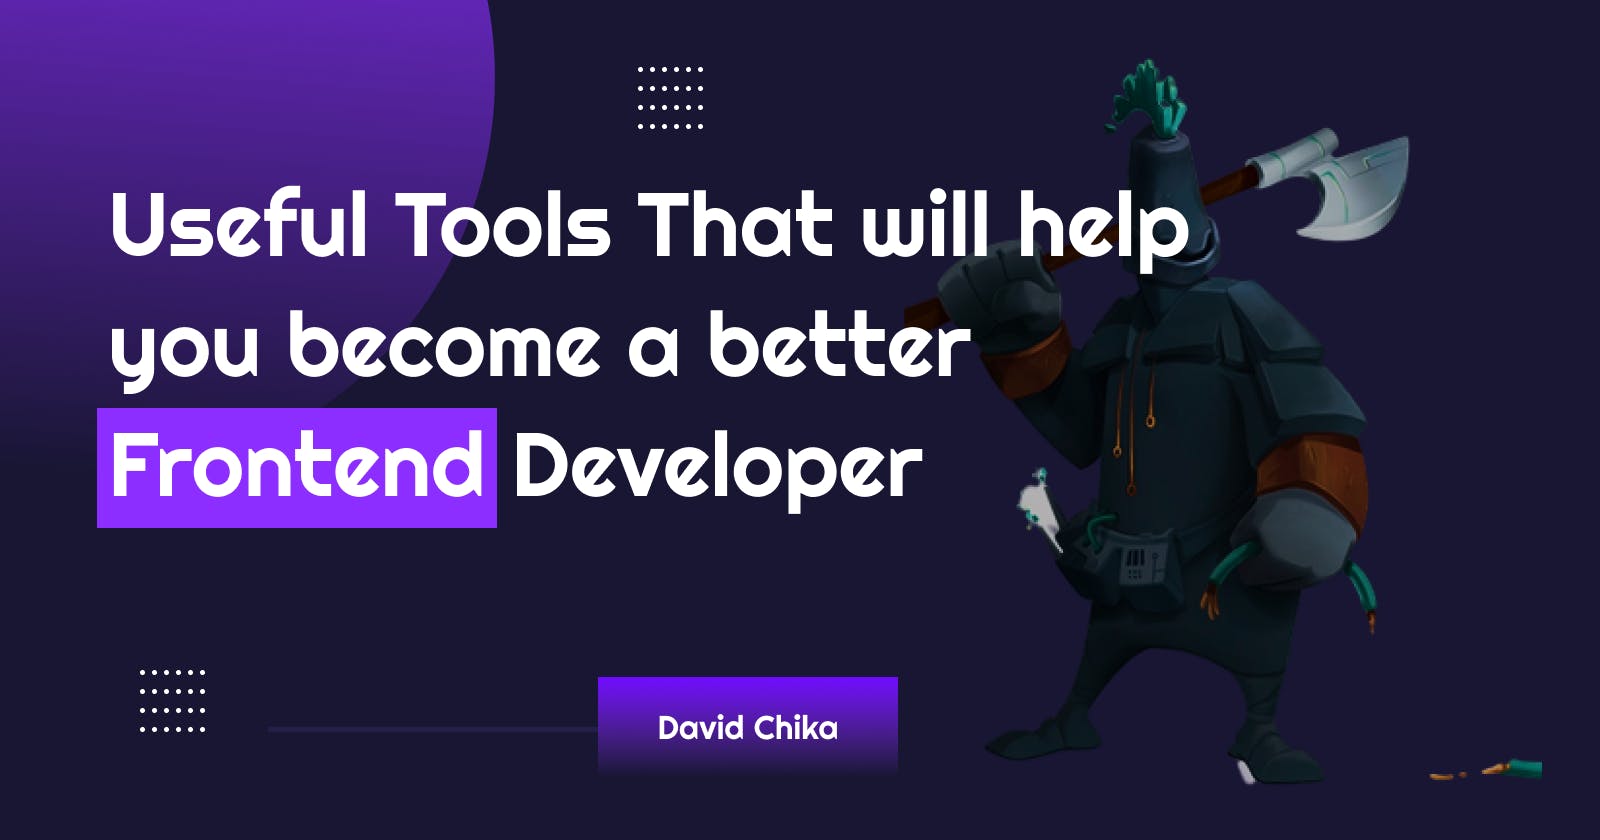 12 Tools That will make you a better Frontend Developer